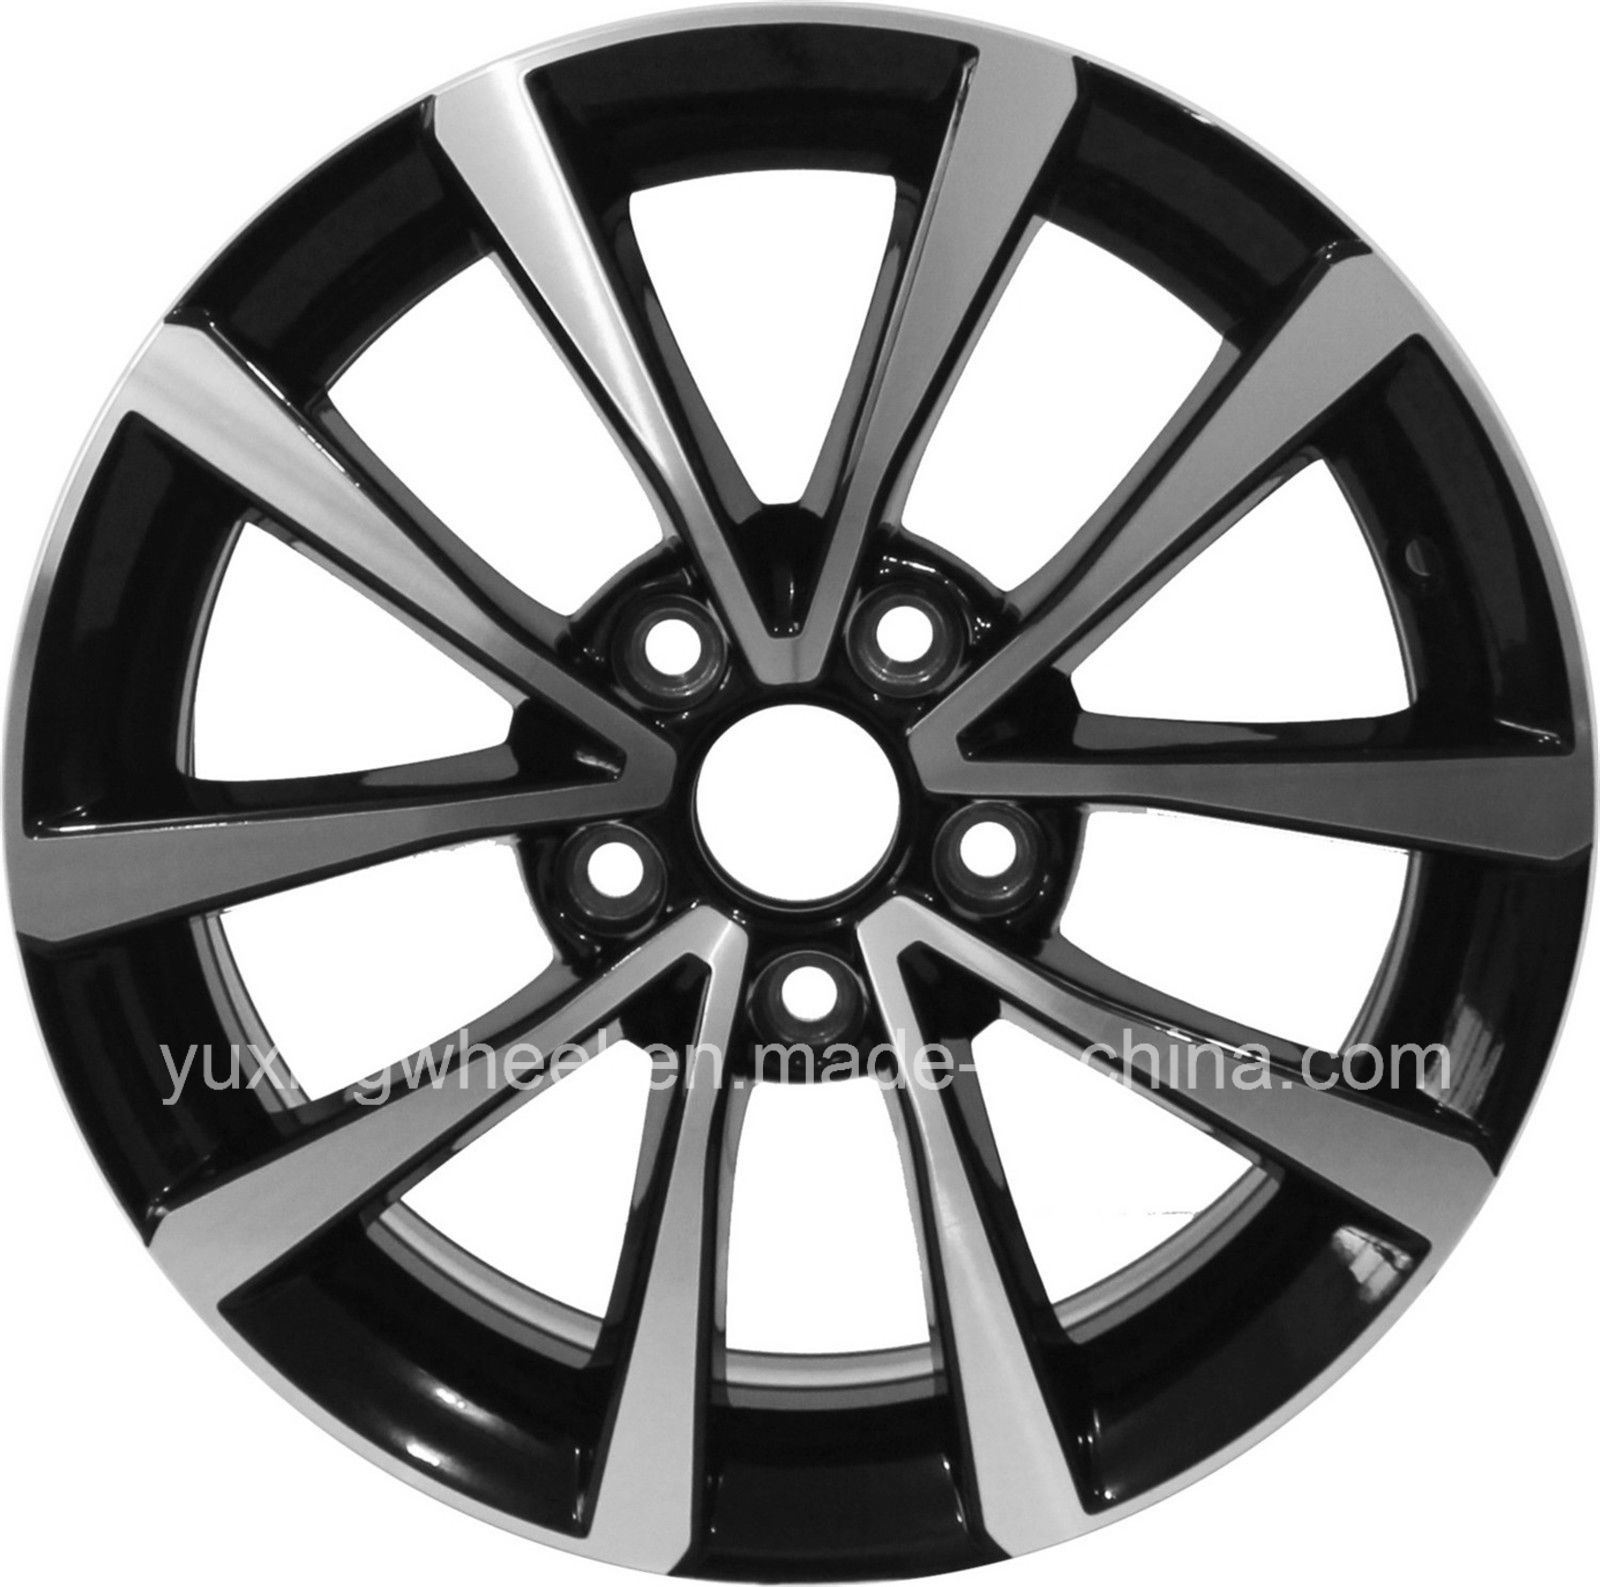 High Quality Replica Alloy Wheel Rims for Volkswagen